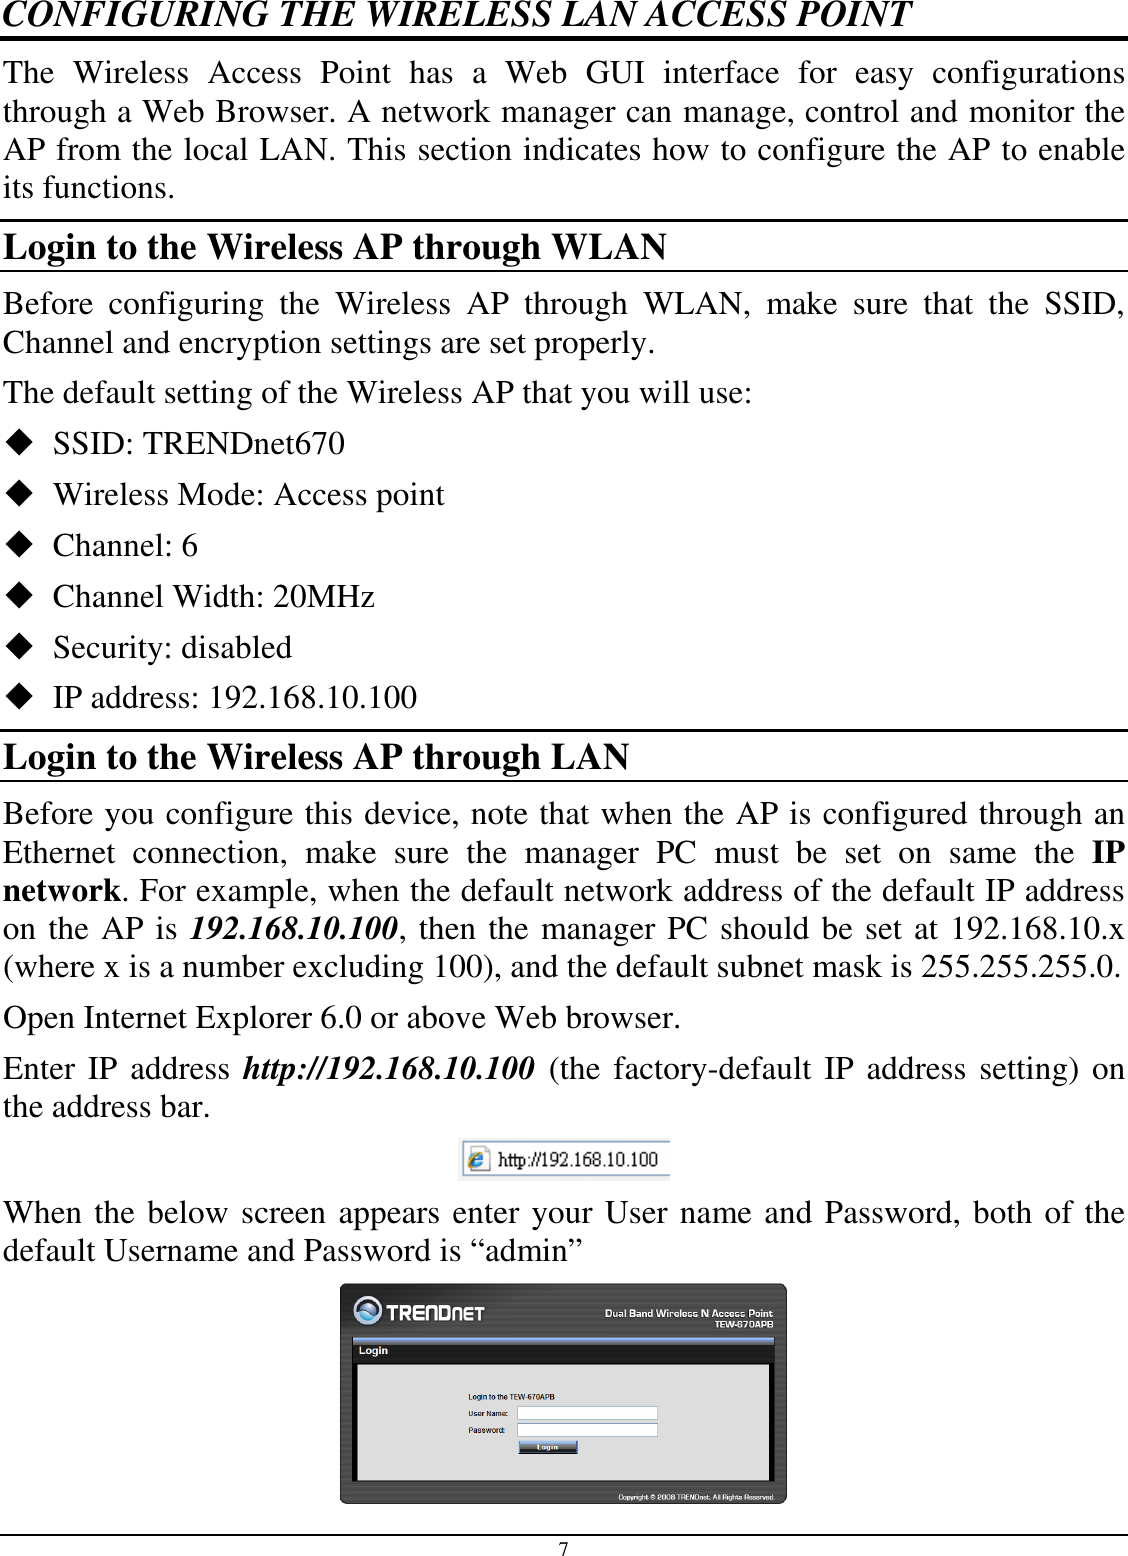 7 CONFIGURING THE WIRELESS LAN ACCESS POINT The  Wireless  Access  Point  has  a  Web  GUI  interface  for  easy  configurations through a Web Browser. A network manager can manage, control and monitor the AP from the local LAN. This section indicates how to configure the AP to enable its functions. Login to the Wireless AP through WLAN Before  configuring  the  Wireless  AP  through  WLAN,  make  sure  that  the  SSID, Channel and encryption settings are set properly. The default setting of the Wireless AP that you will use:  SSID: TRENDnet670  Wireless Mode: Access point  Channel: 6  Channel Width: 20MHz  Security: disabled  IP address: 192.168.10.100 Login to the Wireless AP through LAN Before you configure this device, note that when the AP is configured through an Ethernet  connection,  make  sure  the  manager  PC  must  be  set  on  same  the  IP network. For example, when the default network address of the default IP address on the AP is 192.168.10.100, then the manager PC should be set at 192.168.10.x (where x is a number excluding 100), and the default subnet mask is 255.255.255.0. Open Internet Explorer 6.0 or above Web browser. Enter IP address http://192.168.10.100 (the factory-default IP address setting) on the address bar.  When the below screen appears enter your User name and Password, both of the default Username and Password is “admin”  